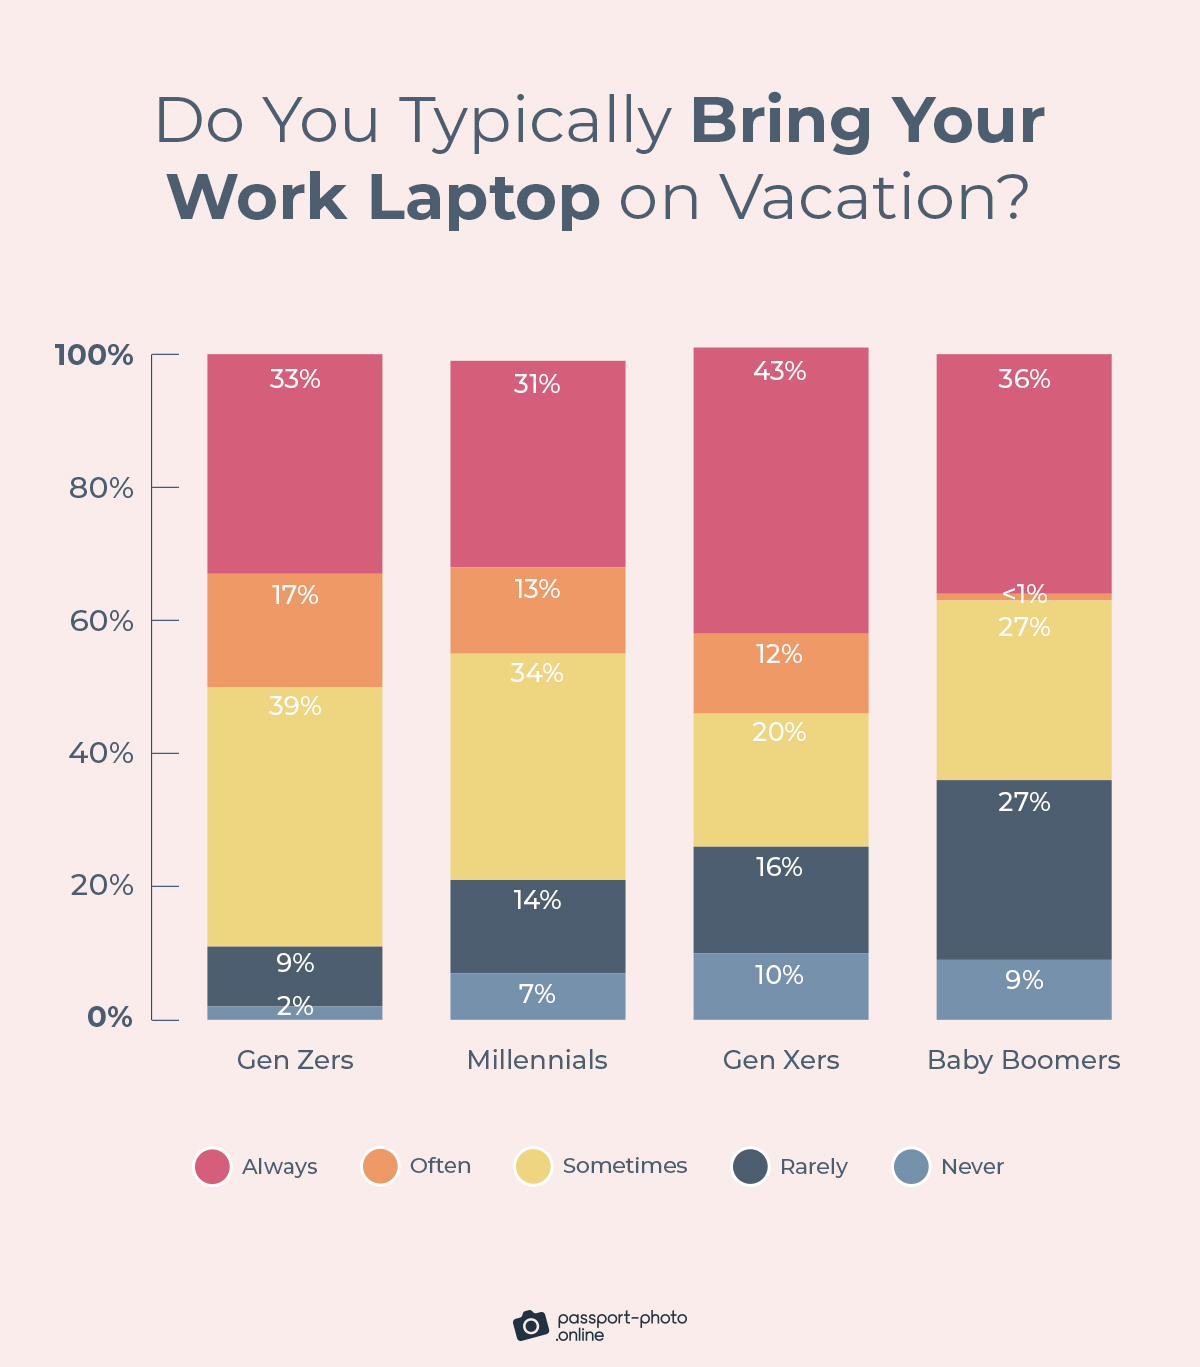 just an average of 12% of workers never or rarely bring work laptops on vacation